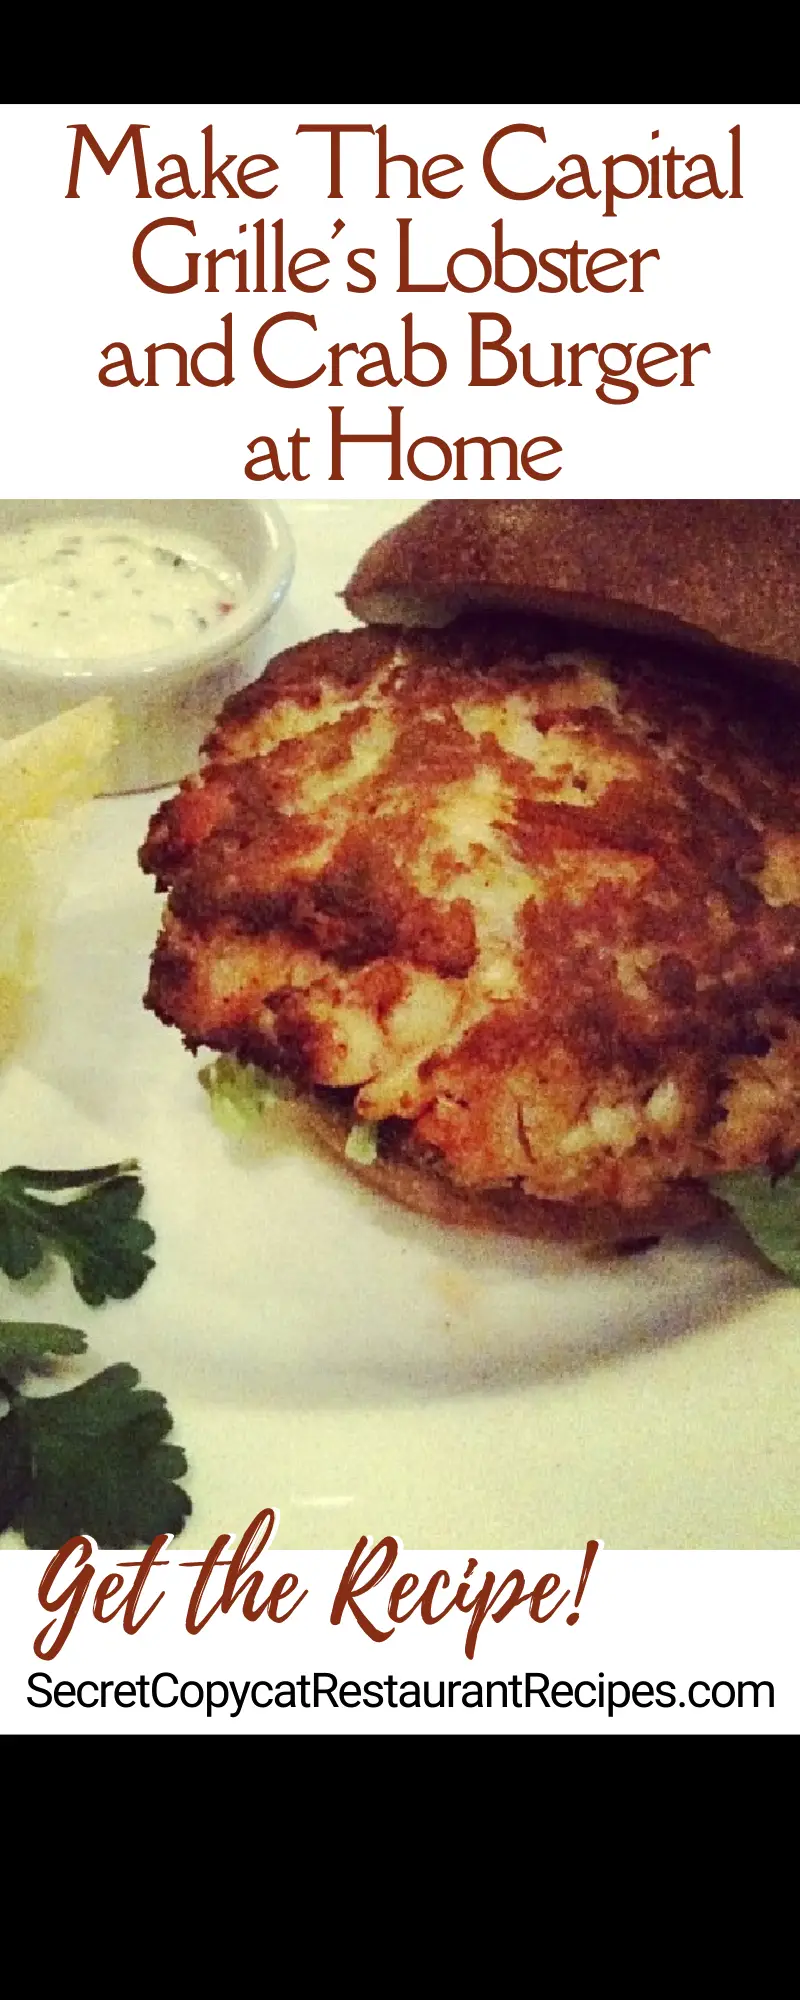 The Capital Grille Lobster and Crab Burger Recipe